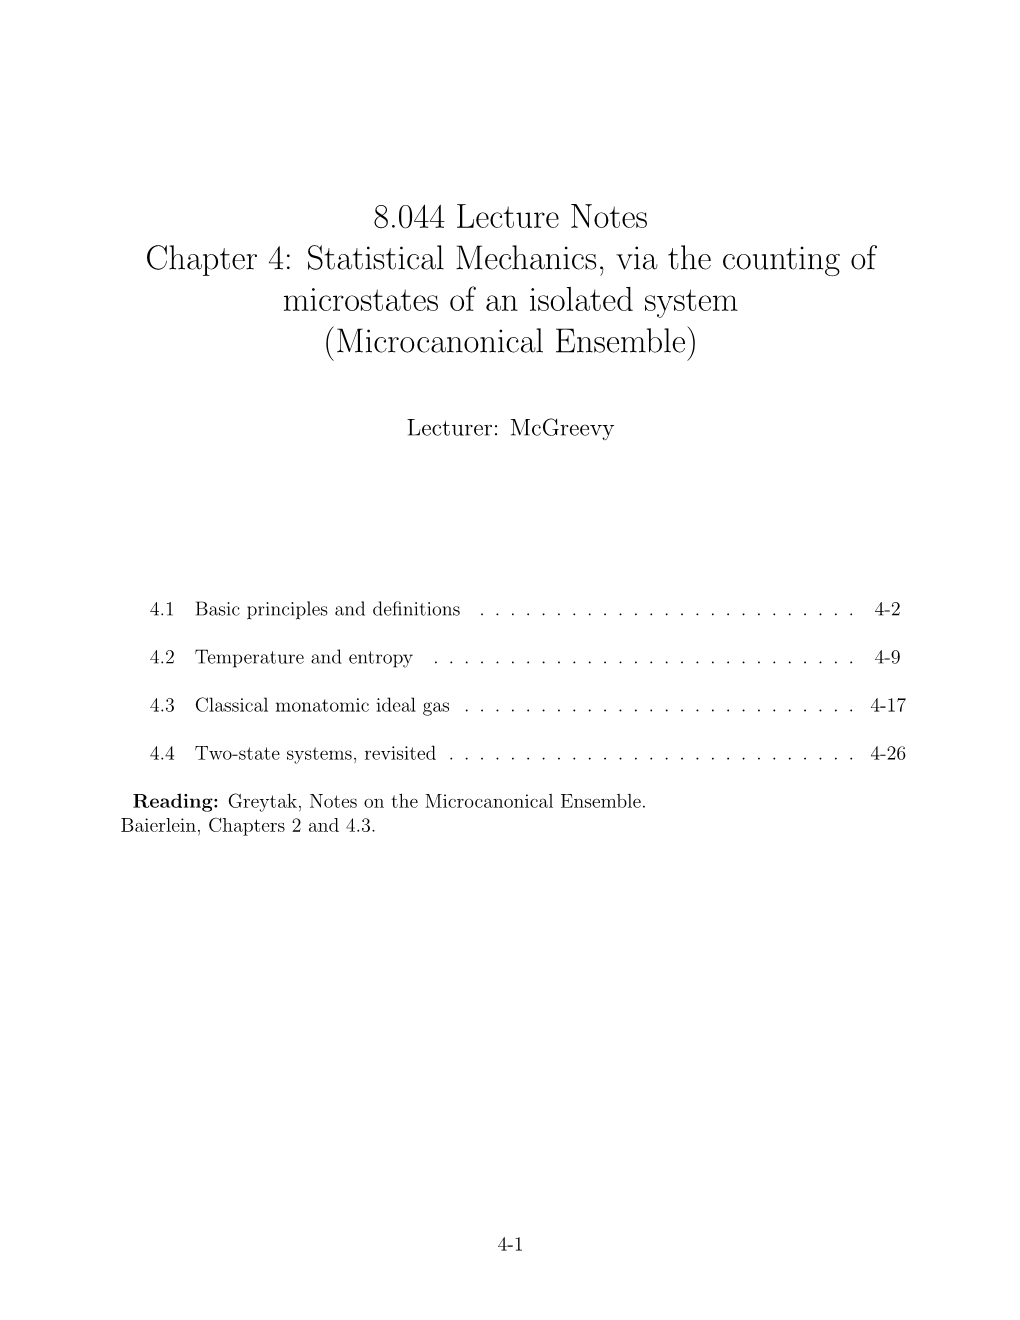 Statistical Mechanics, Via the Counting of Microstates of an Isolated System (Microcanonical Ensemble)